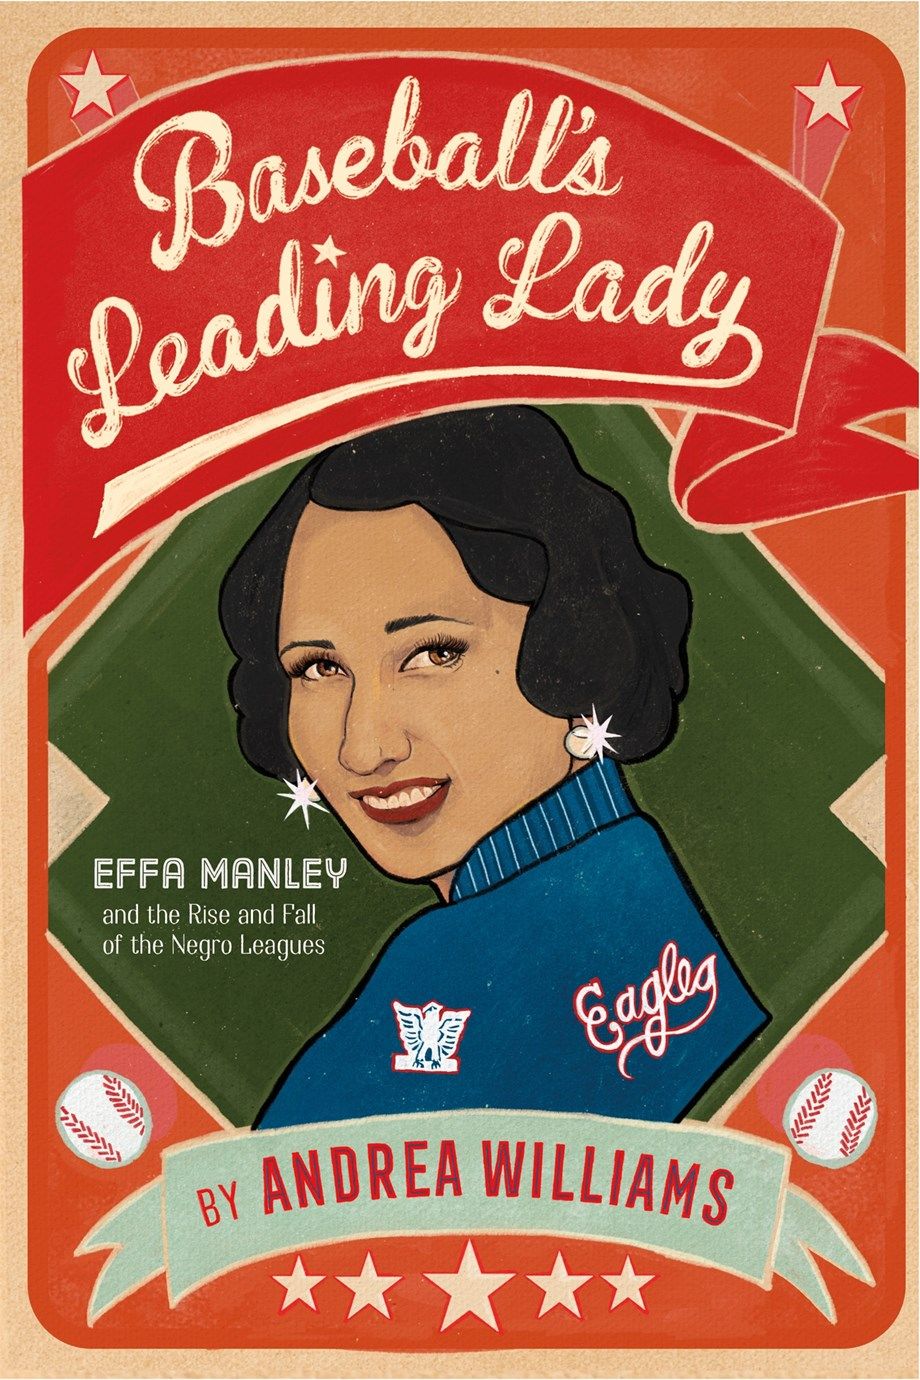 Baseball's Leading Lady review